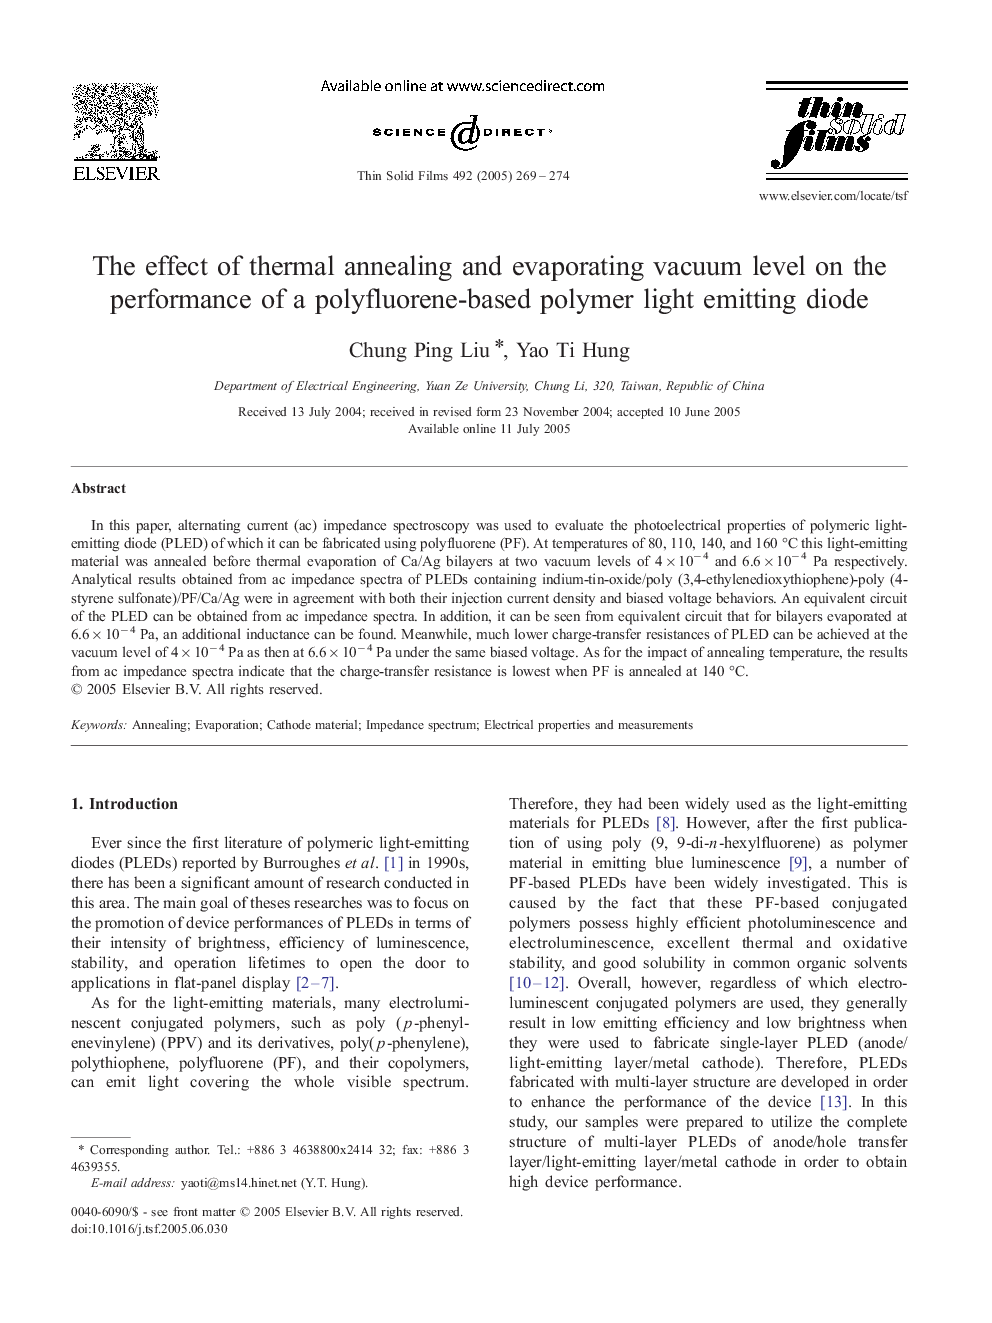 The effect of thermal annealing and evaporating vacuum level on the performance of a polyfluorene-based polymer light emitting diode